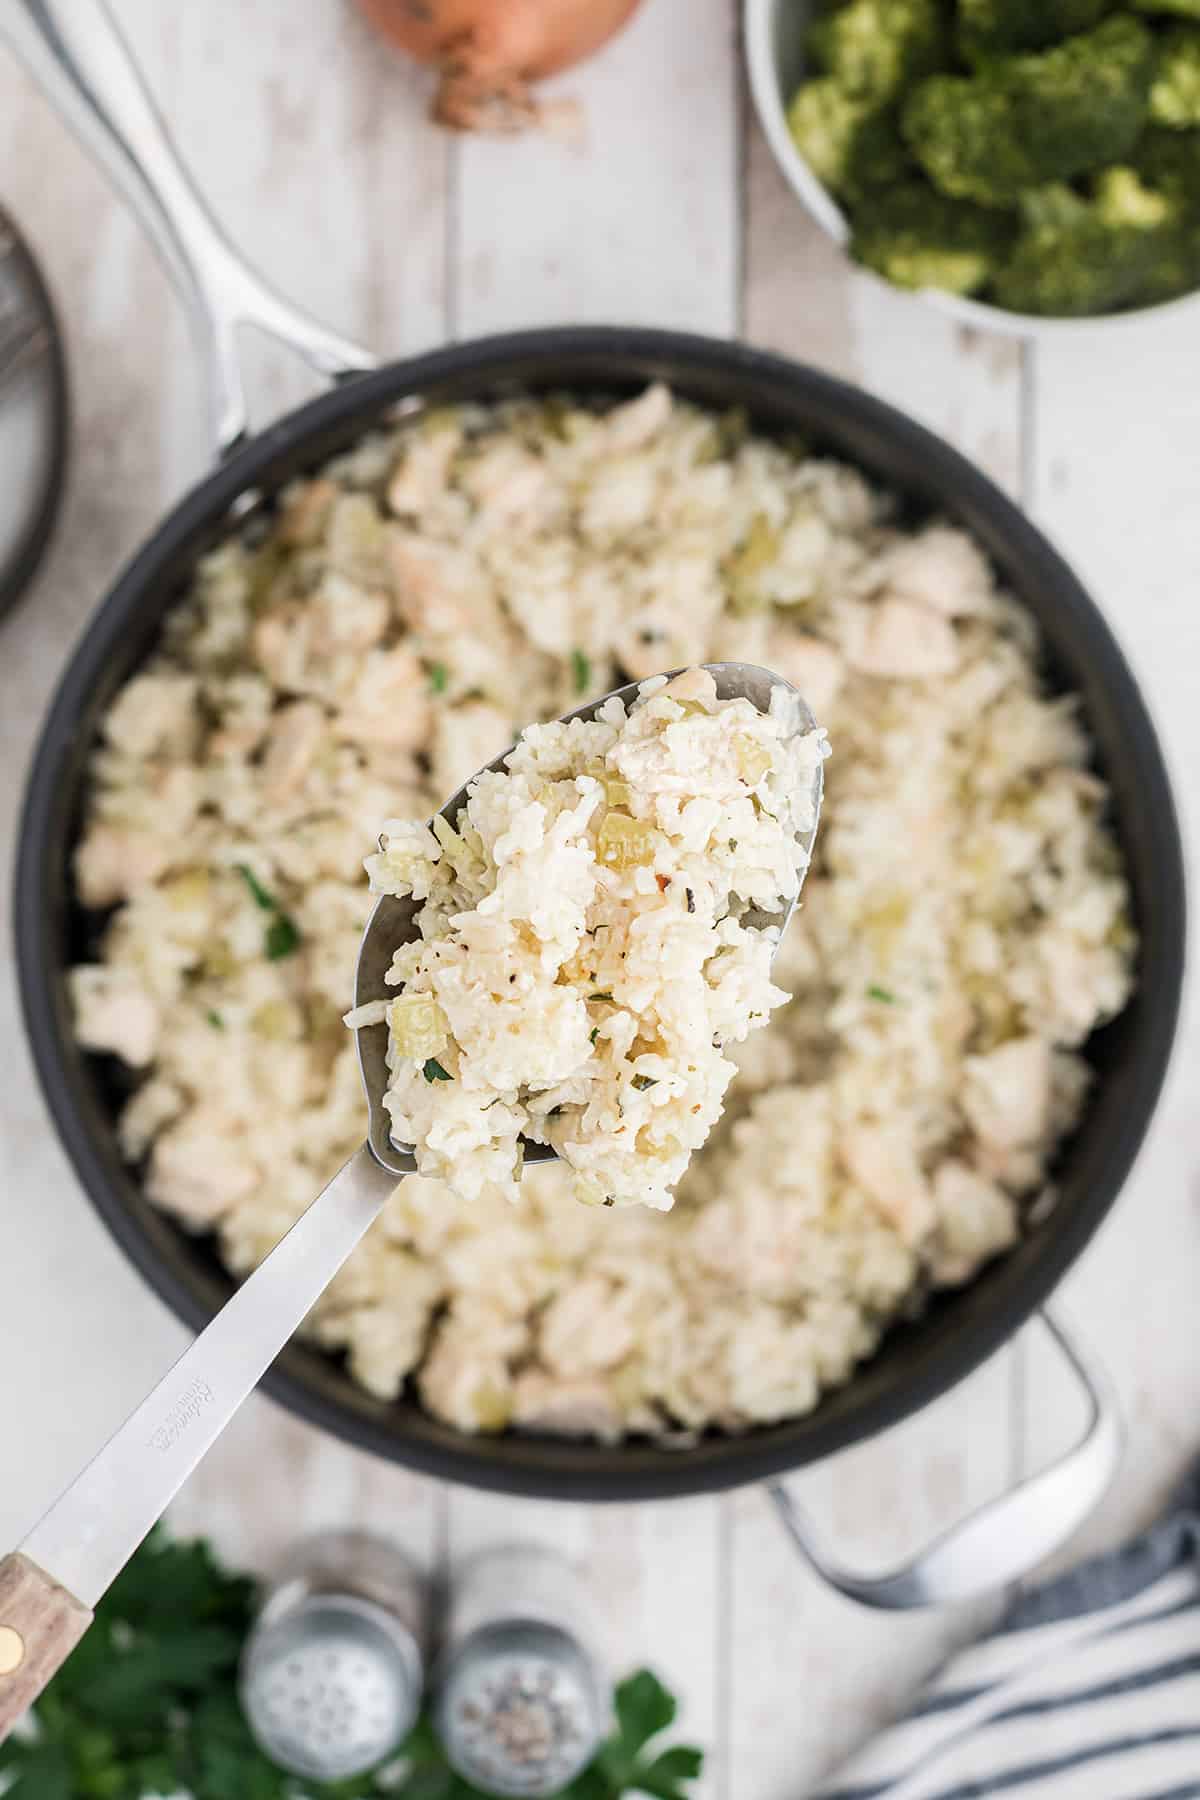 A spoonful of chicken and rice held above a pan.